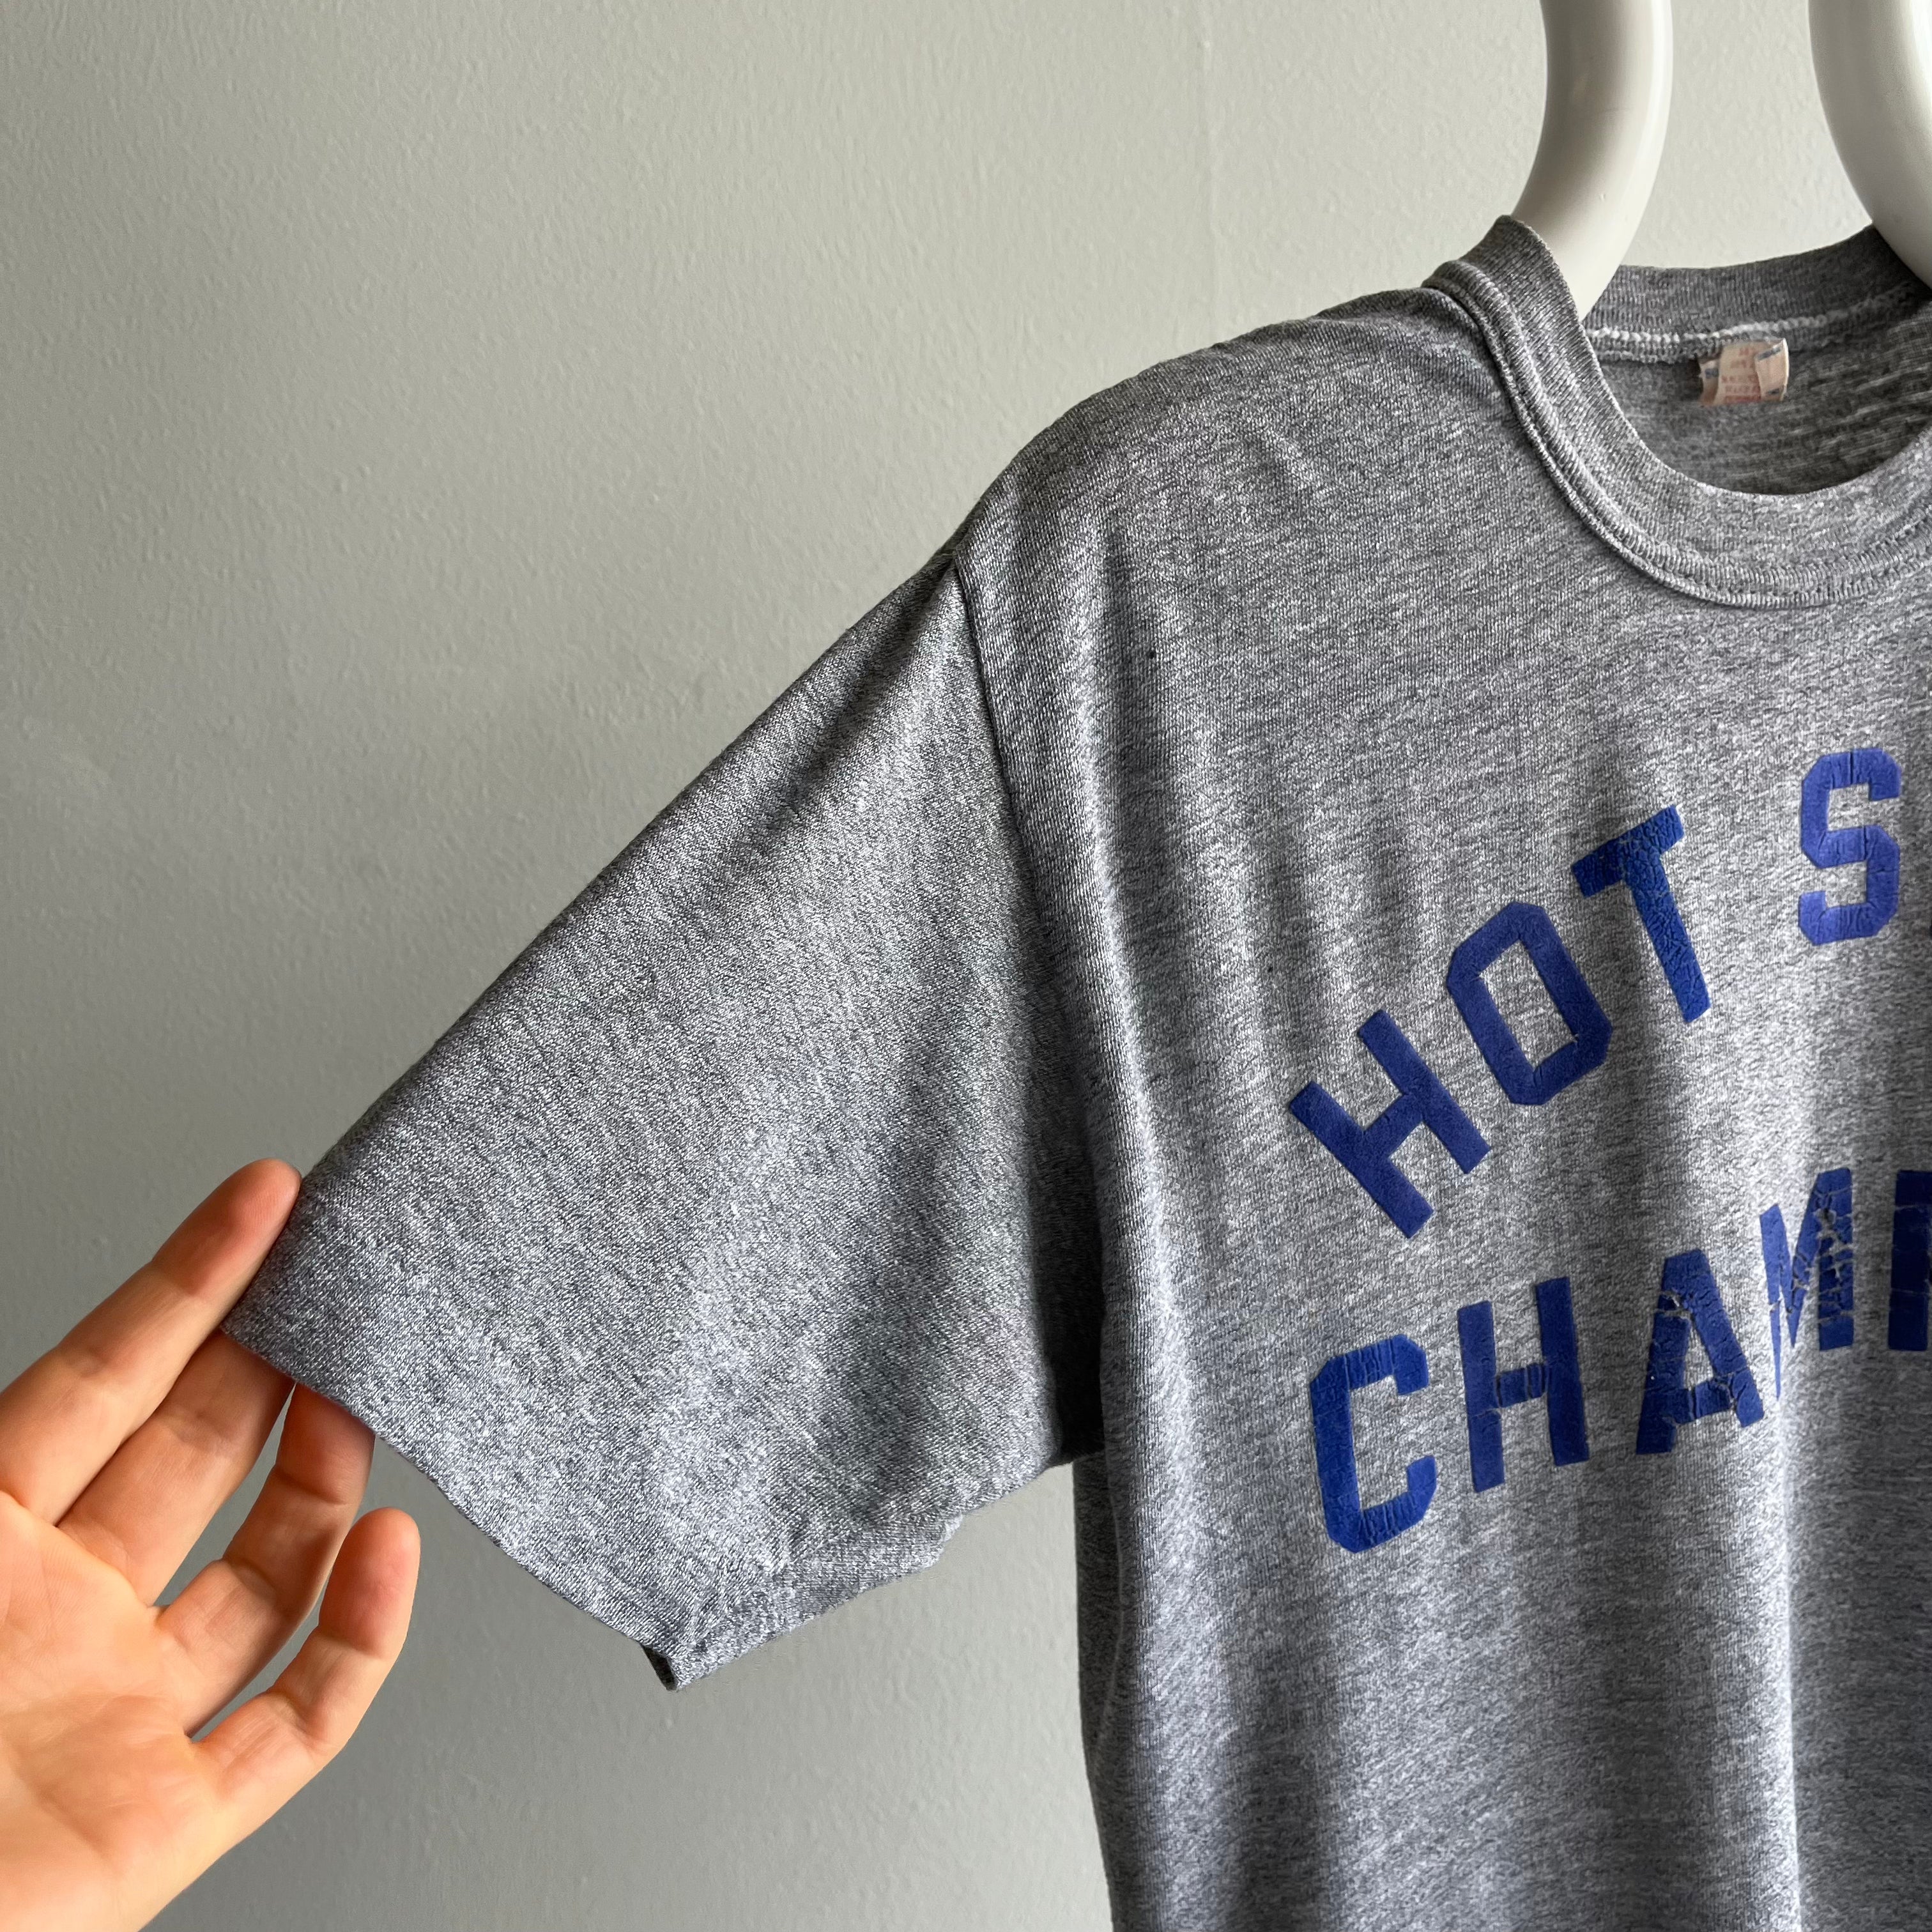 1960/70s Hot Shot Champion Soft and Slouchy T-Shirt